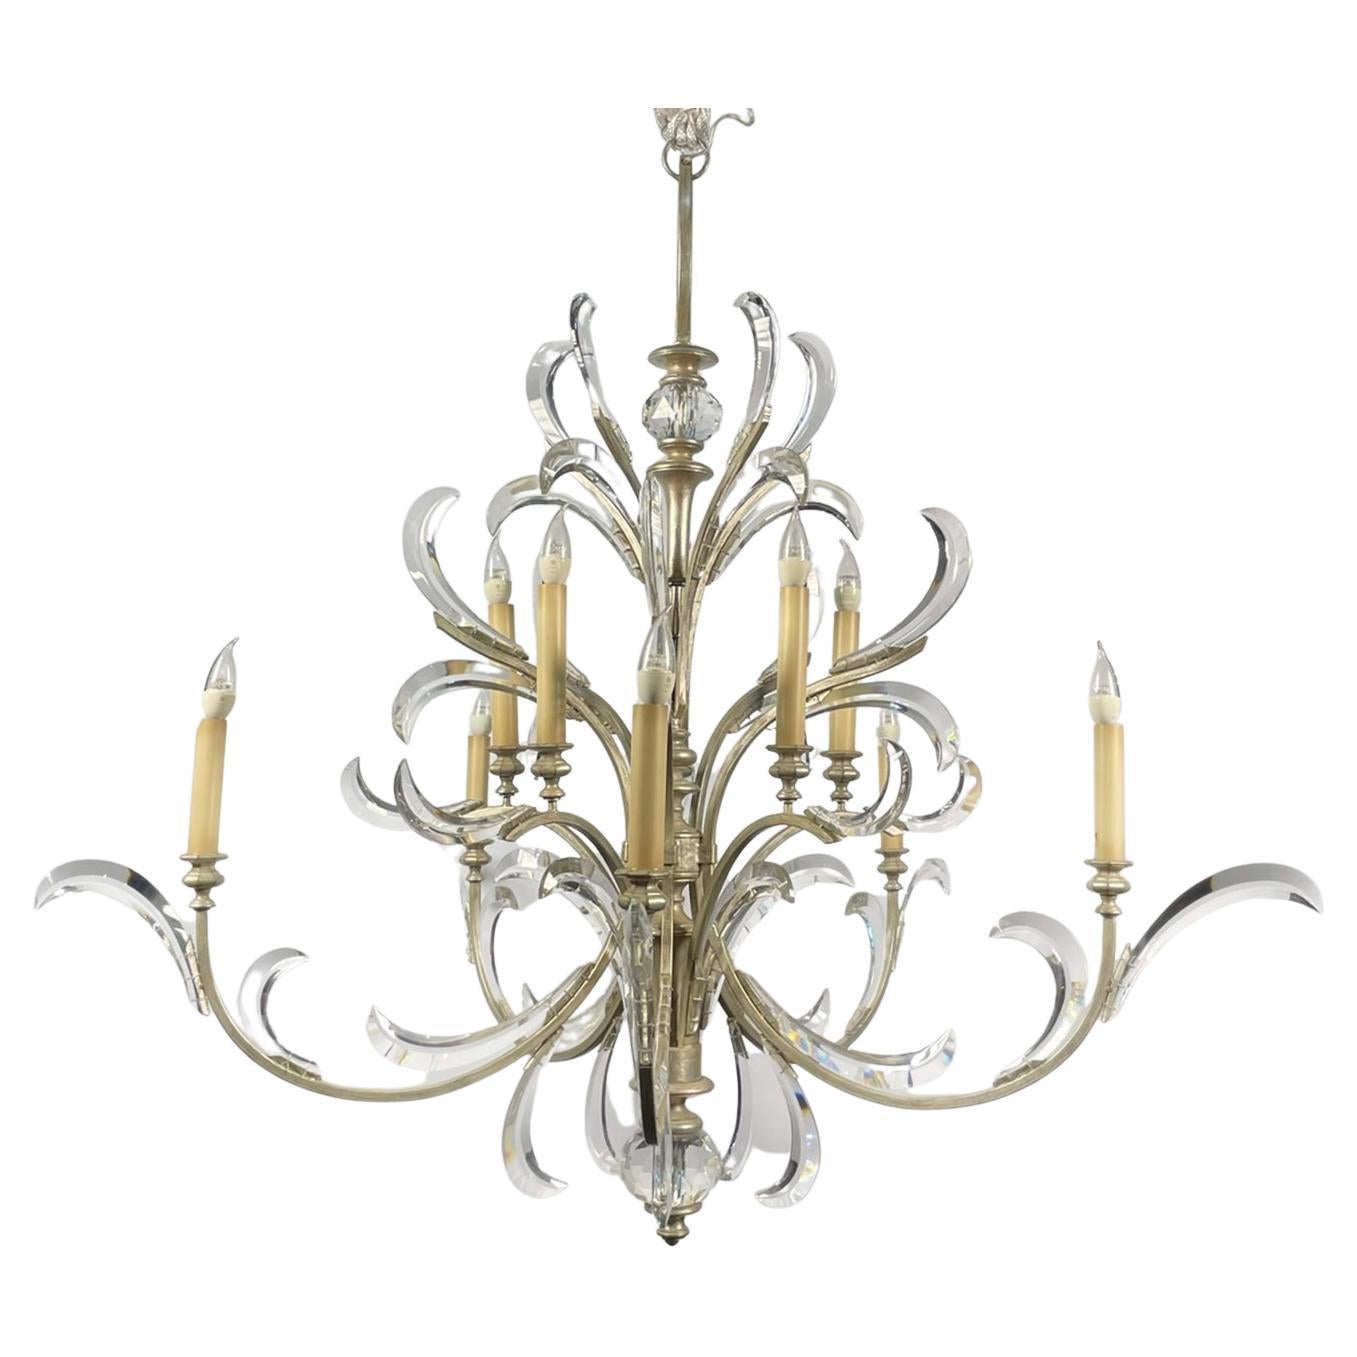 Beveled Arcs Chandelier by Fine Art Handcrafted Lighting, USA